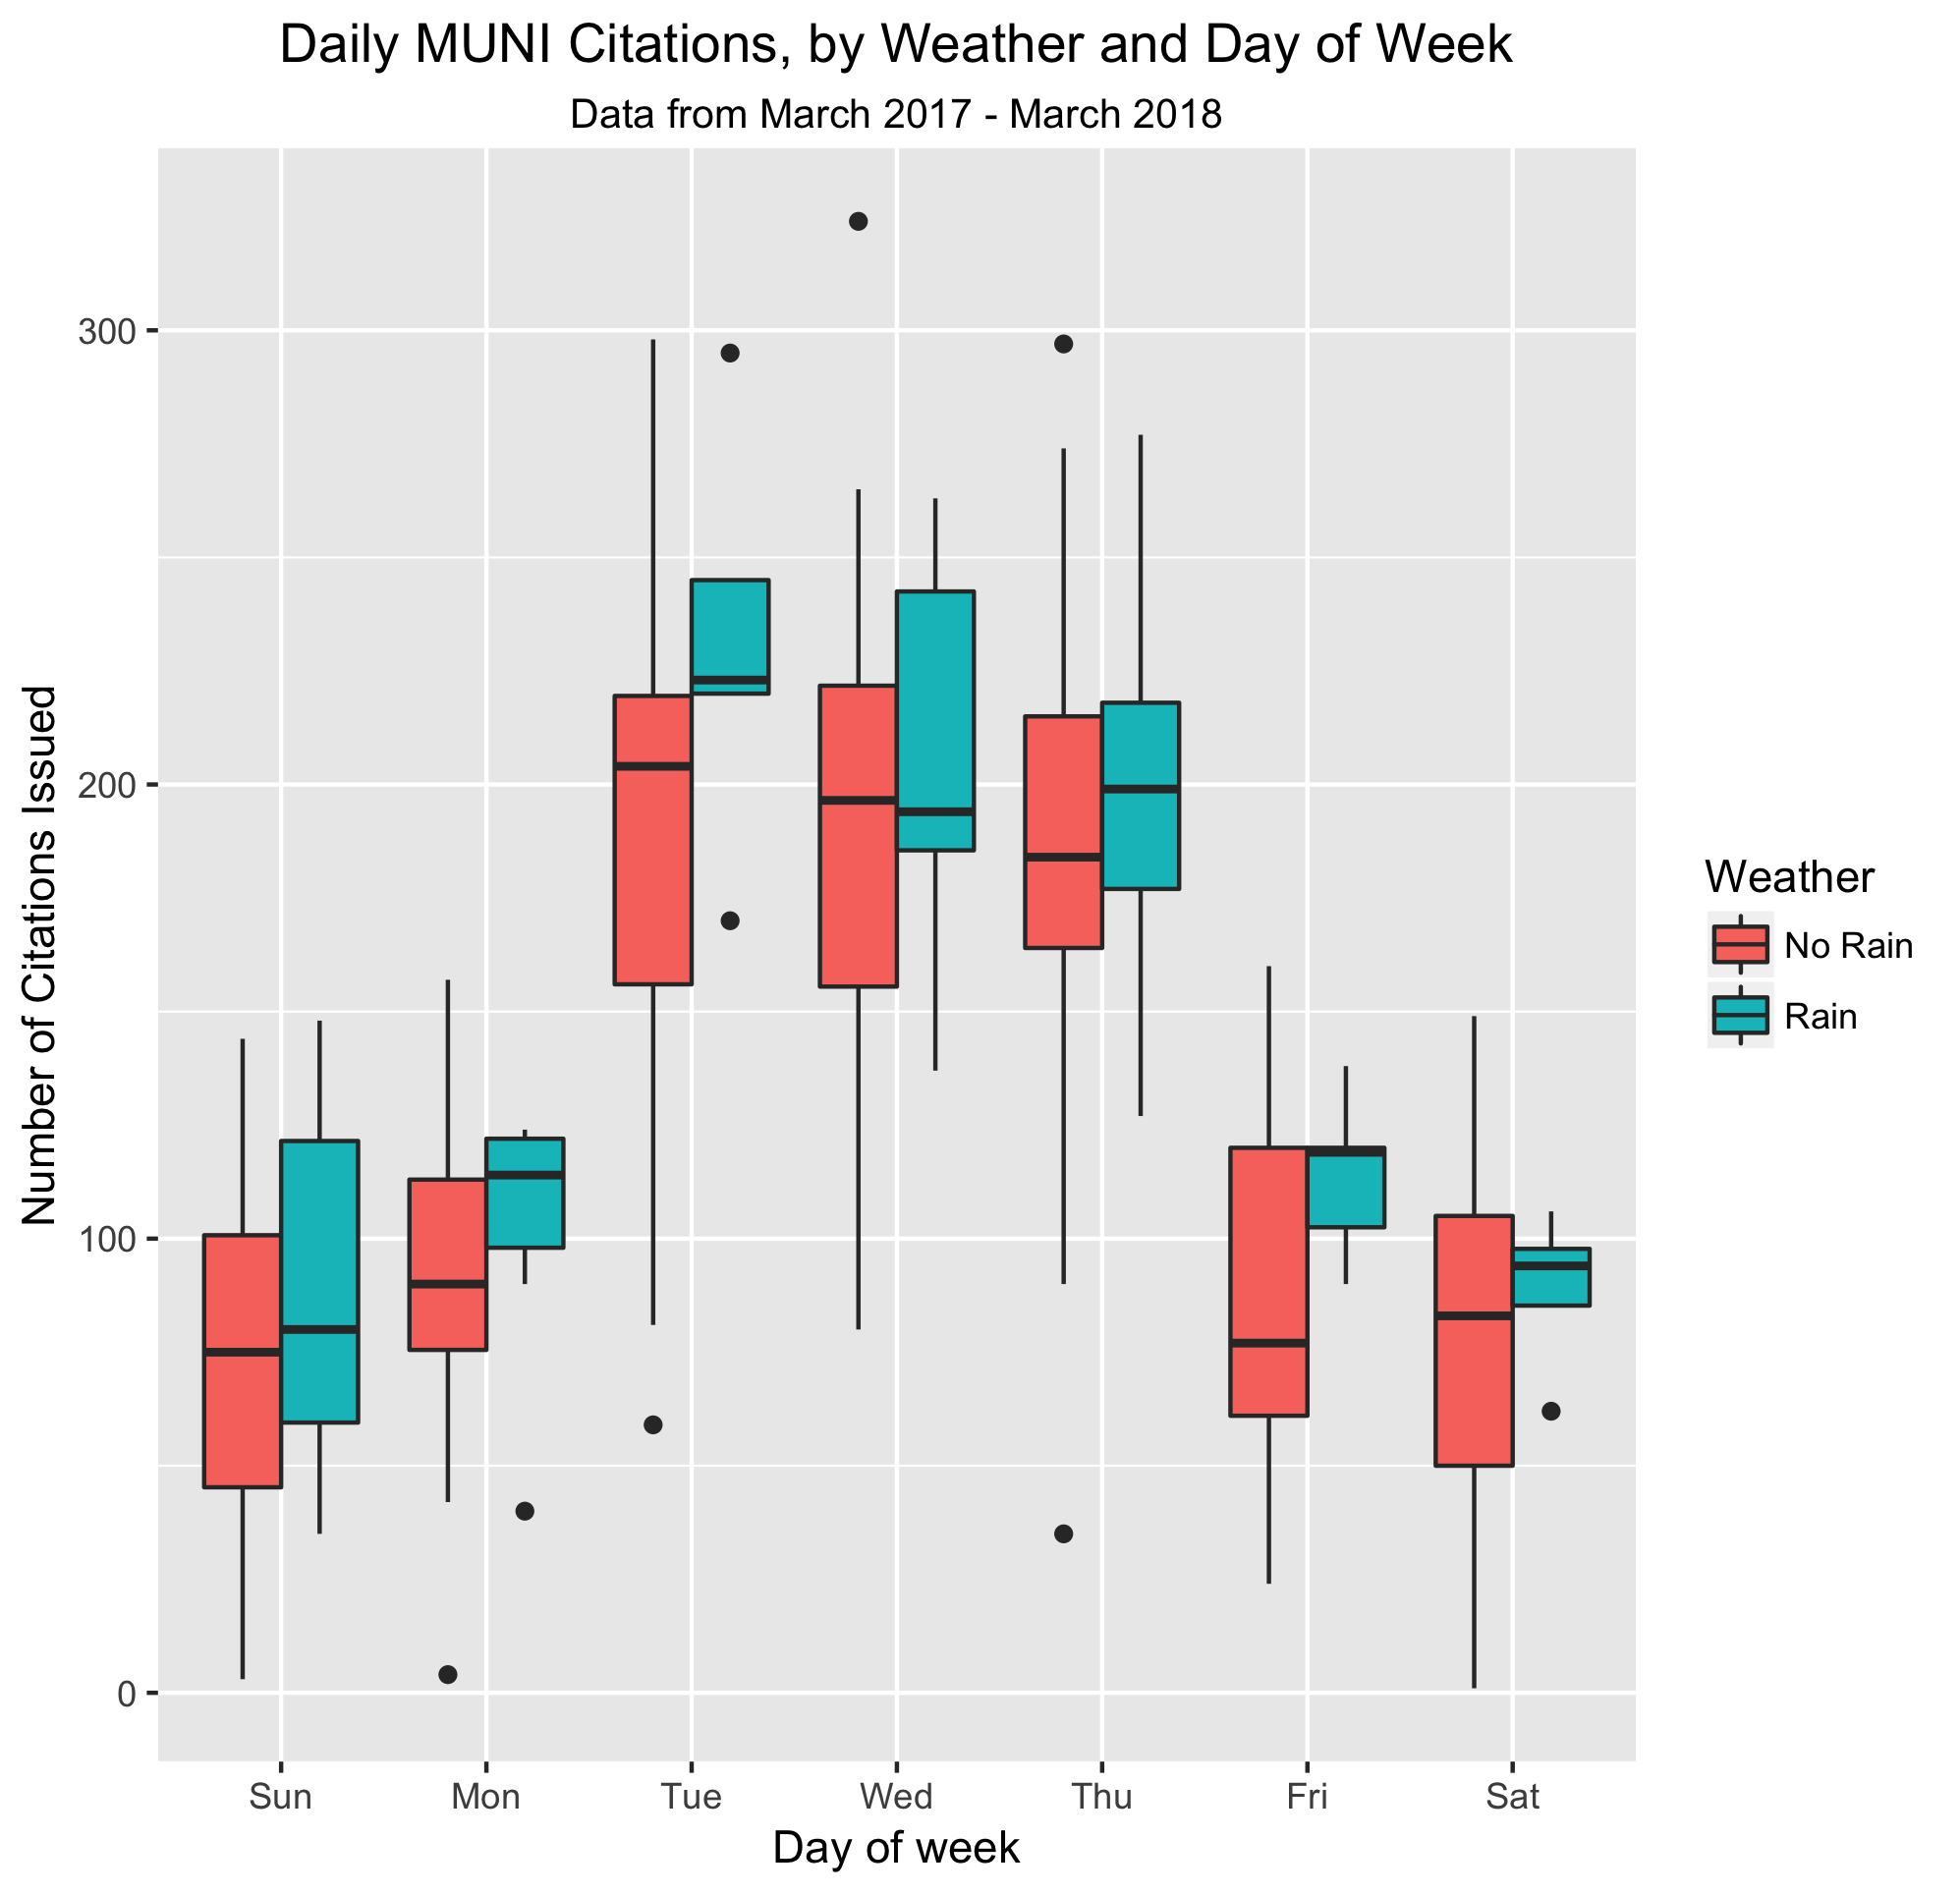 Citations by day of week, weather